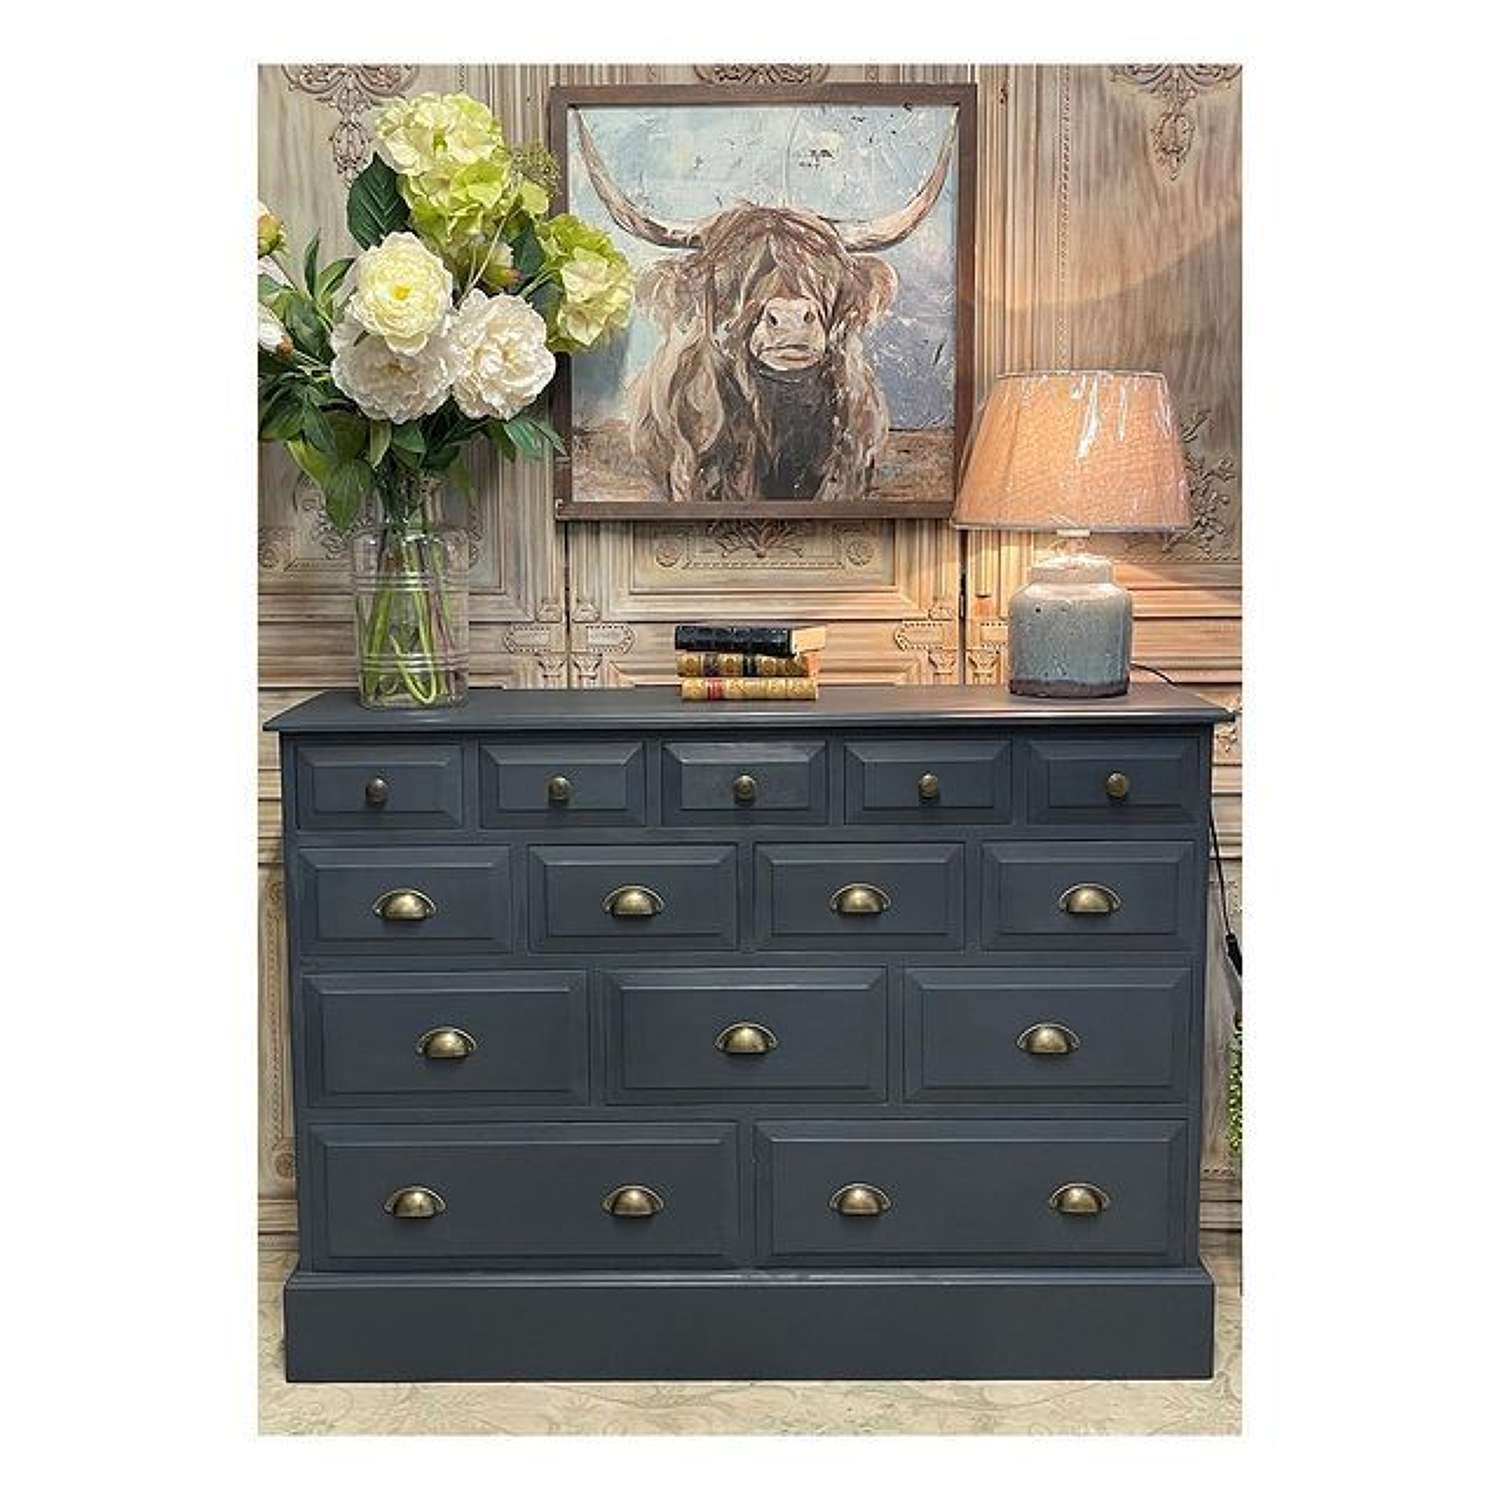 Othecary style chest of drawers